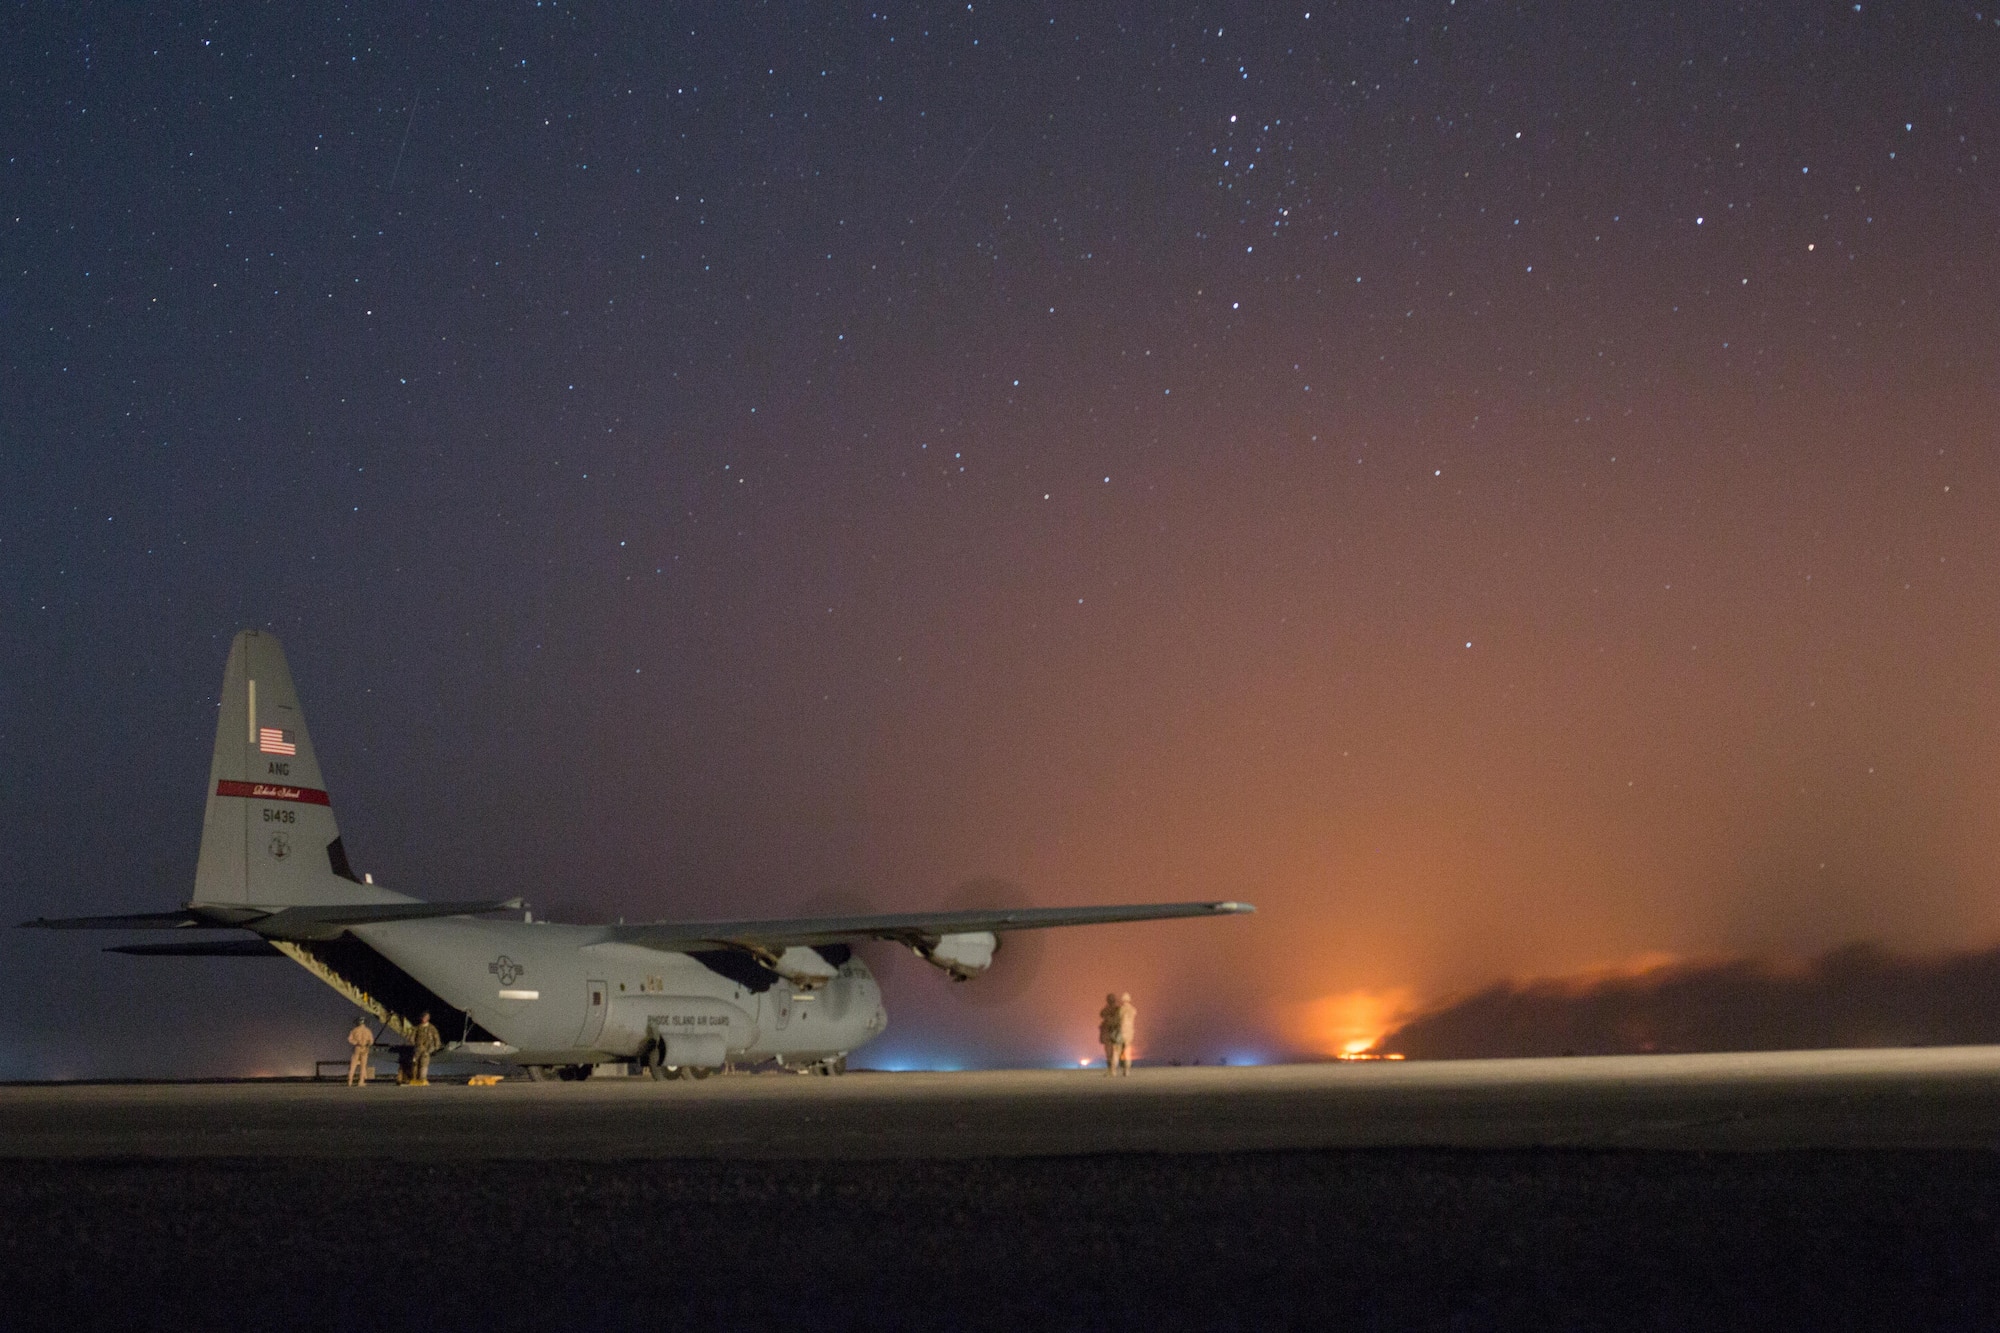 A U.S. Air Force C-130J Super Hercules waits to unload logistical supplies in support of the fight for Mosul at Qayyarah West airfield, Iraq, Oct. 22, 2016. This is the second aircraft to land there following completion of repairs to the runway after Da’esh damaged it in an attempt to disrupt Iraqi Security forces from gaining control of the area. Control of the Qayyarah West airfield has enabled the opening of an air corridor to support operations throughout northern Iraq. A Coalition of over 60 nations has formed to provide assistance and training to Iraqi forces to counter Da’esh, re-establish Iraq’s borders and re-take lost terrain thereby restoring regional stability and security.  (U.S. Army photo by Spc. Christopher Brecht)